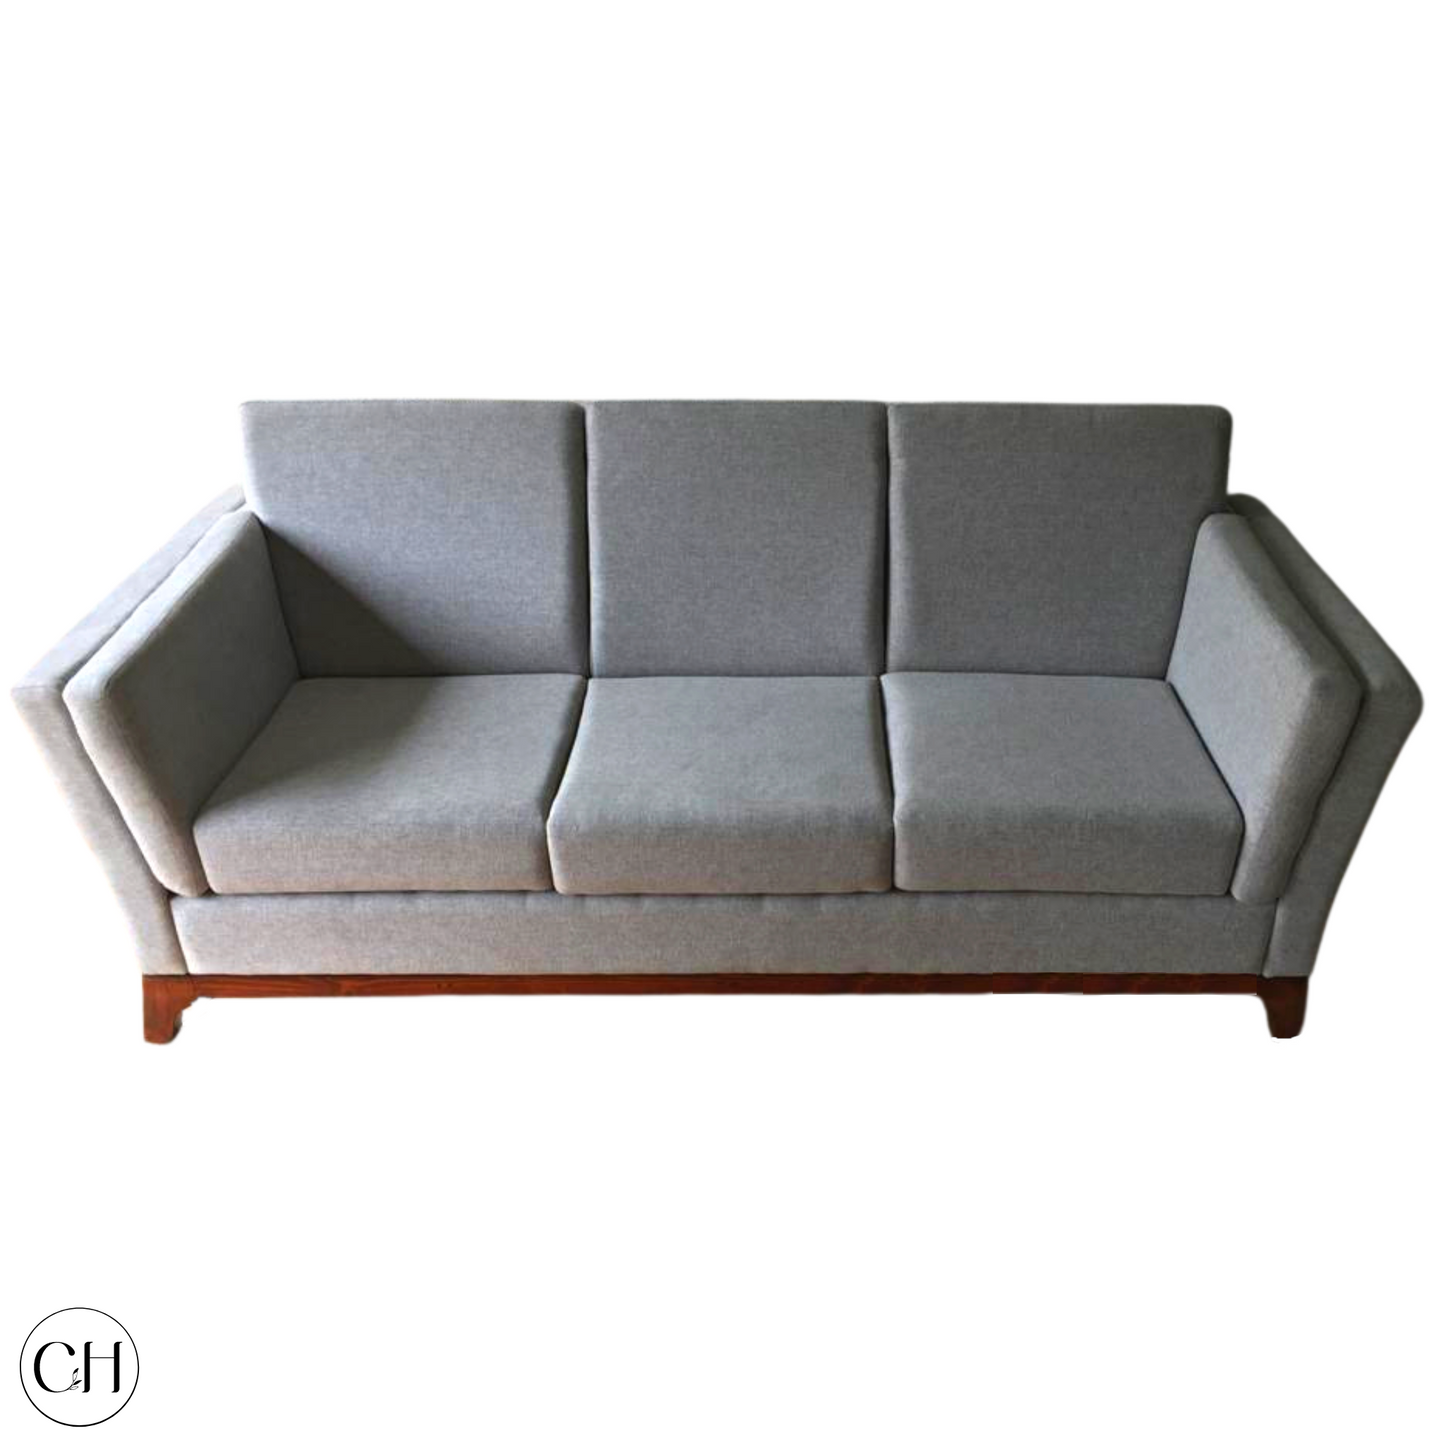 CustHum Aasana, 3-Seater Upholstered Sofa in gray fabric, top view against white background